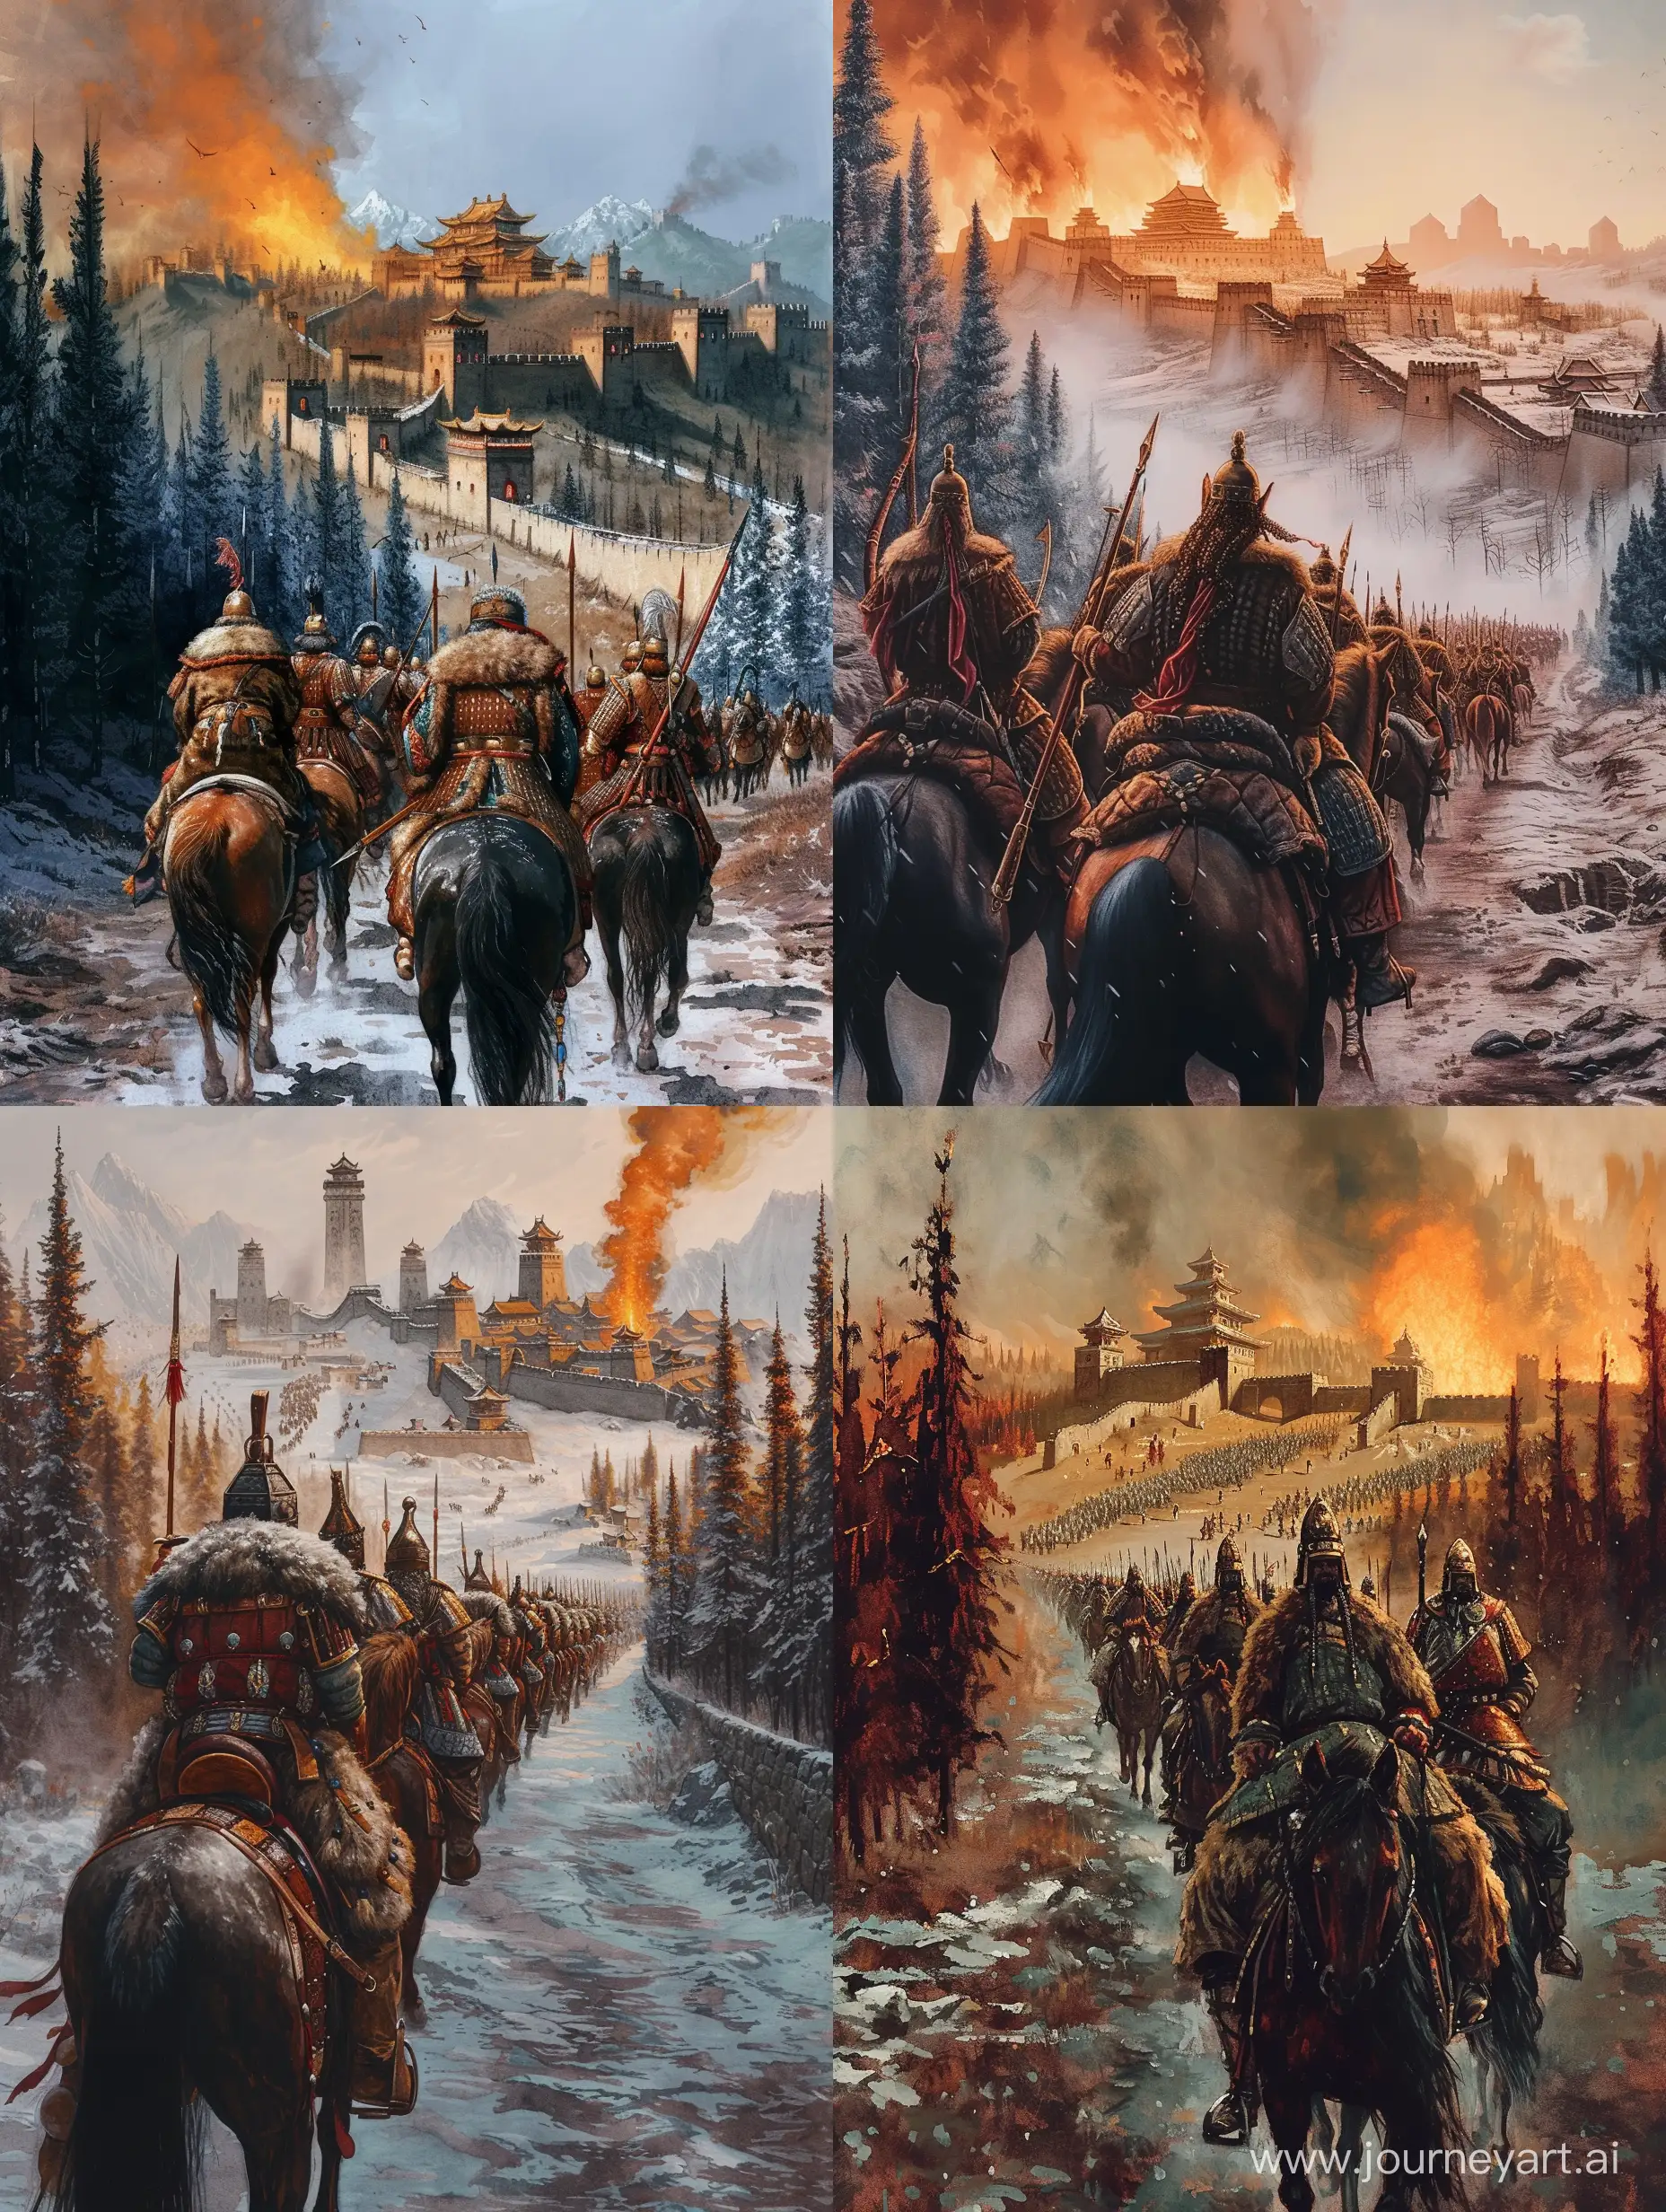 Cinematic realism by gouache, Majestic scene of ancient Mongol warriors marching away, mongolian commanders in luxurious winter attire riding horses close-up, Ancient chinese city with high walls and tall towers in the distance, fire and smoke, steppe environment with forests and high mountains, cinematic lighting and layout